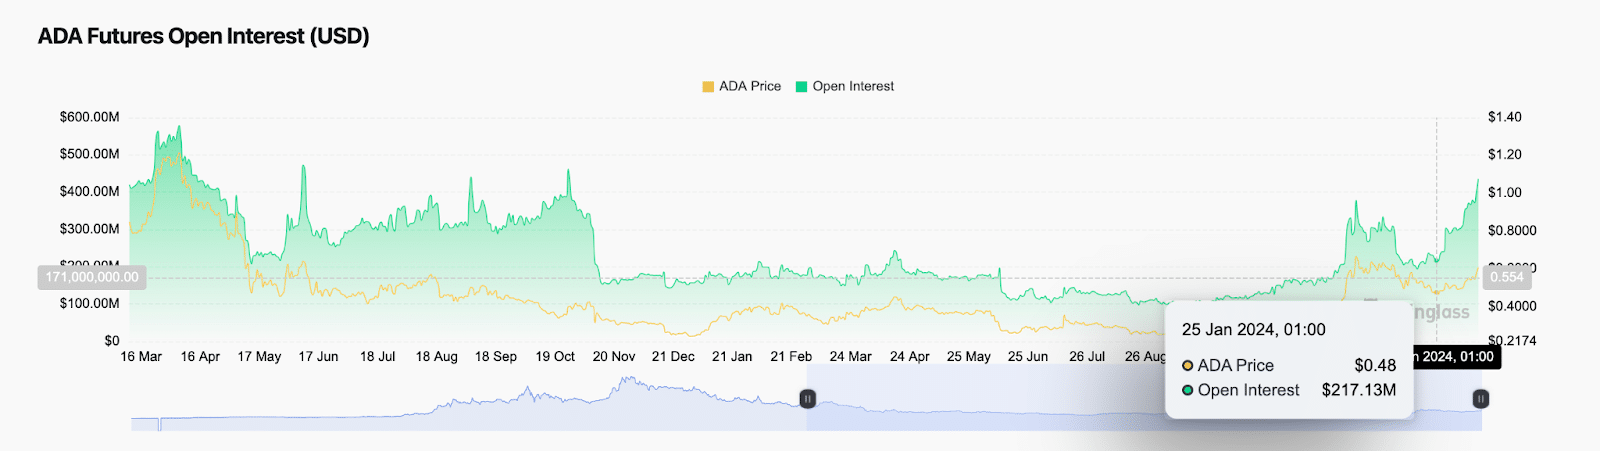 Cardano price reclaims .60 as open interest doubles in 21 days  - 1